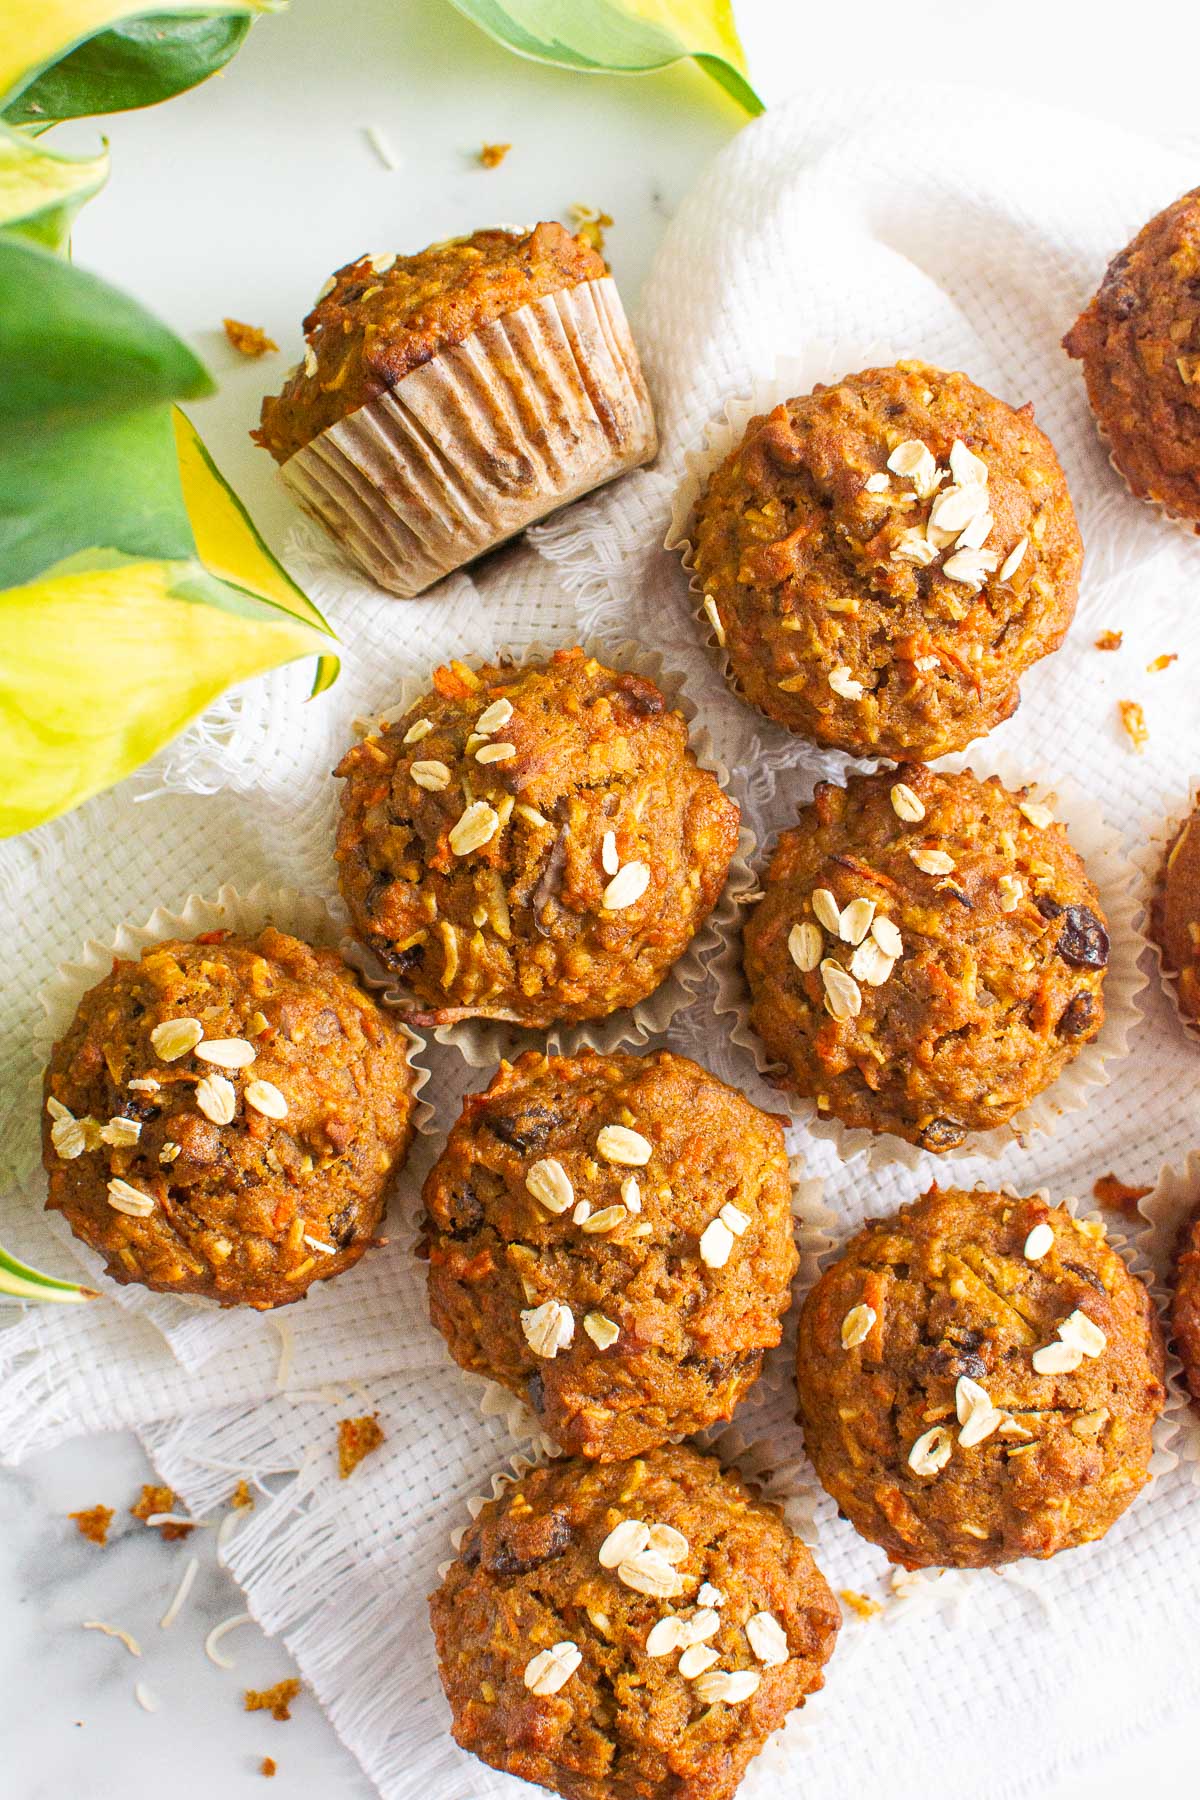 Healthy Morning Glory Muffins" />
	
	
	
	
	
	
	
	
	
	
	
	
	
	{"@context":"https://schema.org","@graph":[{"@type":"Organization","@id":"https://ifoodreal.com/#organization","name":"iFoodreal","url":"https://ifoodreal.com/","sameAs":["https://www.facebook.com/iFOODreal/","https://www.instagram.com/ifoodreal/","https://www.pinterest.com/ifoodreal/","https://twitter.com/ifoodreal"],"logo":{"@type":"ImageObject","@id":"https://ifoodreal.com/#logo","inLanguage":"en-US","url":"https://ifoodreal.com/wp-content/uploads/2017/11/ifrLogo-1.png","contentUrl":"https://ifoodreal.com/wp-content/uploads/2017/11/ifrLogo-1.png","width":150,"height":37,"caption":"iFoodreal"},"image":{"@id":"https://ifoodreal.com/#logo"}},{"@type":"WebSite","@id":"https://ifoodreal.com/#website","url":"https://ifoodreal.com/","name":"iFOODreal.com","description":"","publisher":{"@id":"https://ifoodreal.com/#organization"},"potentialAction":[{"@type":"SearchAction","target":{"@type":"EntryPoint","urlTemplate":"https://ifoodreal.com/?s={search_term_string}"},"query-input":"required name=search_term_string"}],"inLanguage":"en-US"},{"@type":"ImageObject","@id":"https://ifoodreal.com/morning-glory-muffins/#primaryimage","inLanguage":"en-US","url":"https://ifoodreal.com/wp-content/uploads/2022/01/fg-healthy-morning-glory-muffins-recipe-3.jpg","contentUrl":"https://ifoodreal.com/wp-content/uploads/2022/01/fg-healthy-morning-glory-muffins-recipe-3.jpg","width":1250,"height":1250,"caption":"healthy morning glory muffins"},{"@type":["WebPage","FAQPage"],"@id":"https://ifoodreal.com/morning-glory-muffins/#webpage","url":"https://ifoodreal.com/morning-glory-muffins/","name":"Healthy Morning Glory Muffins {High Fiber, Low Sugar}